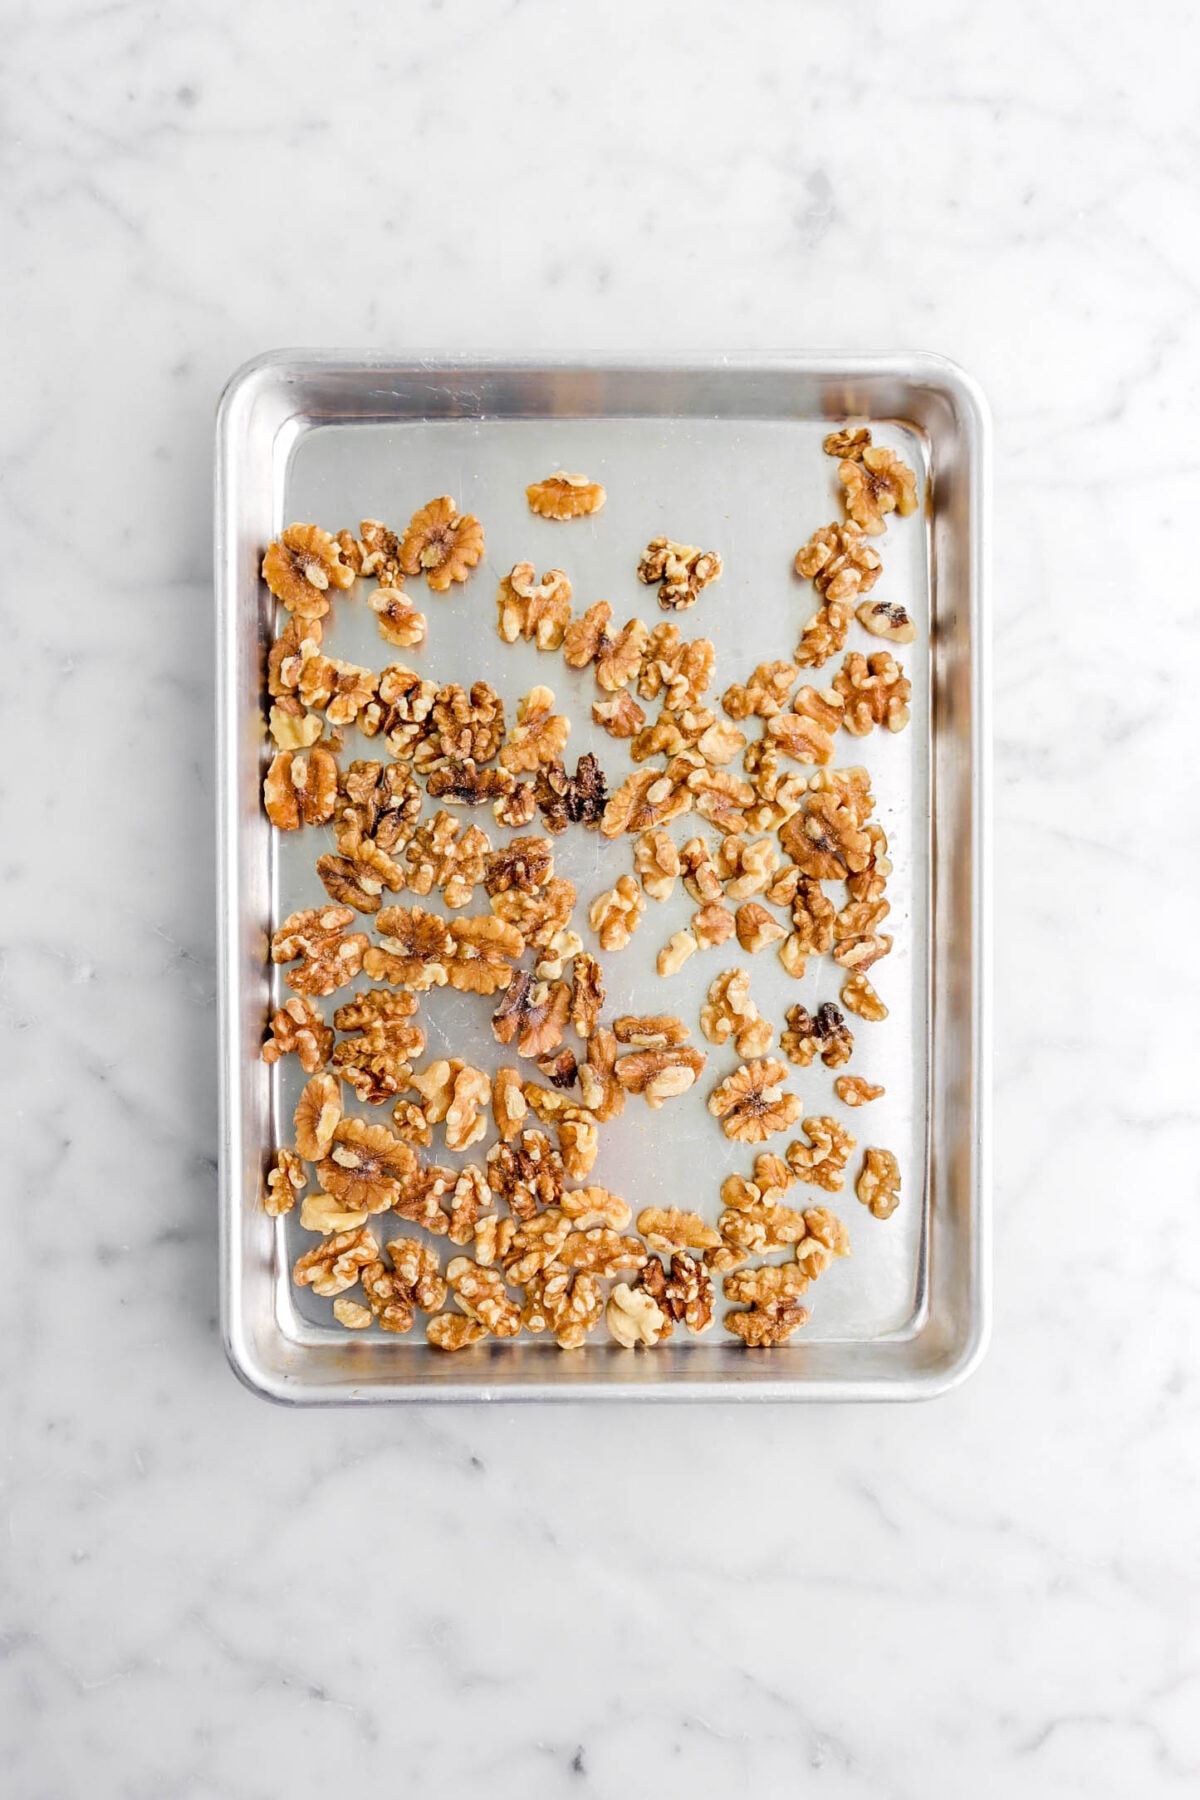 walnuts on small sheet pan on marble surface.